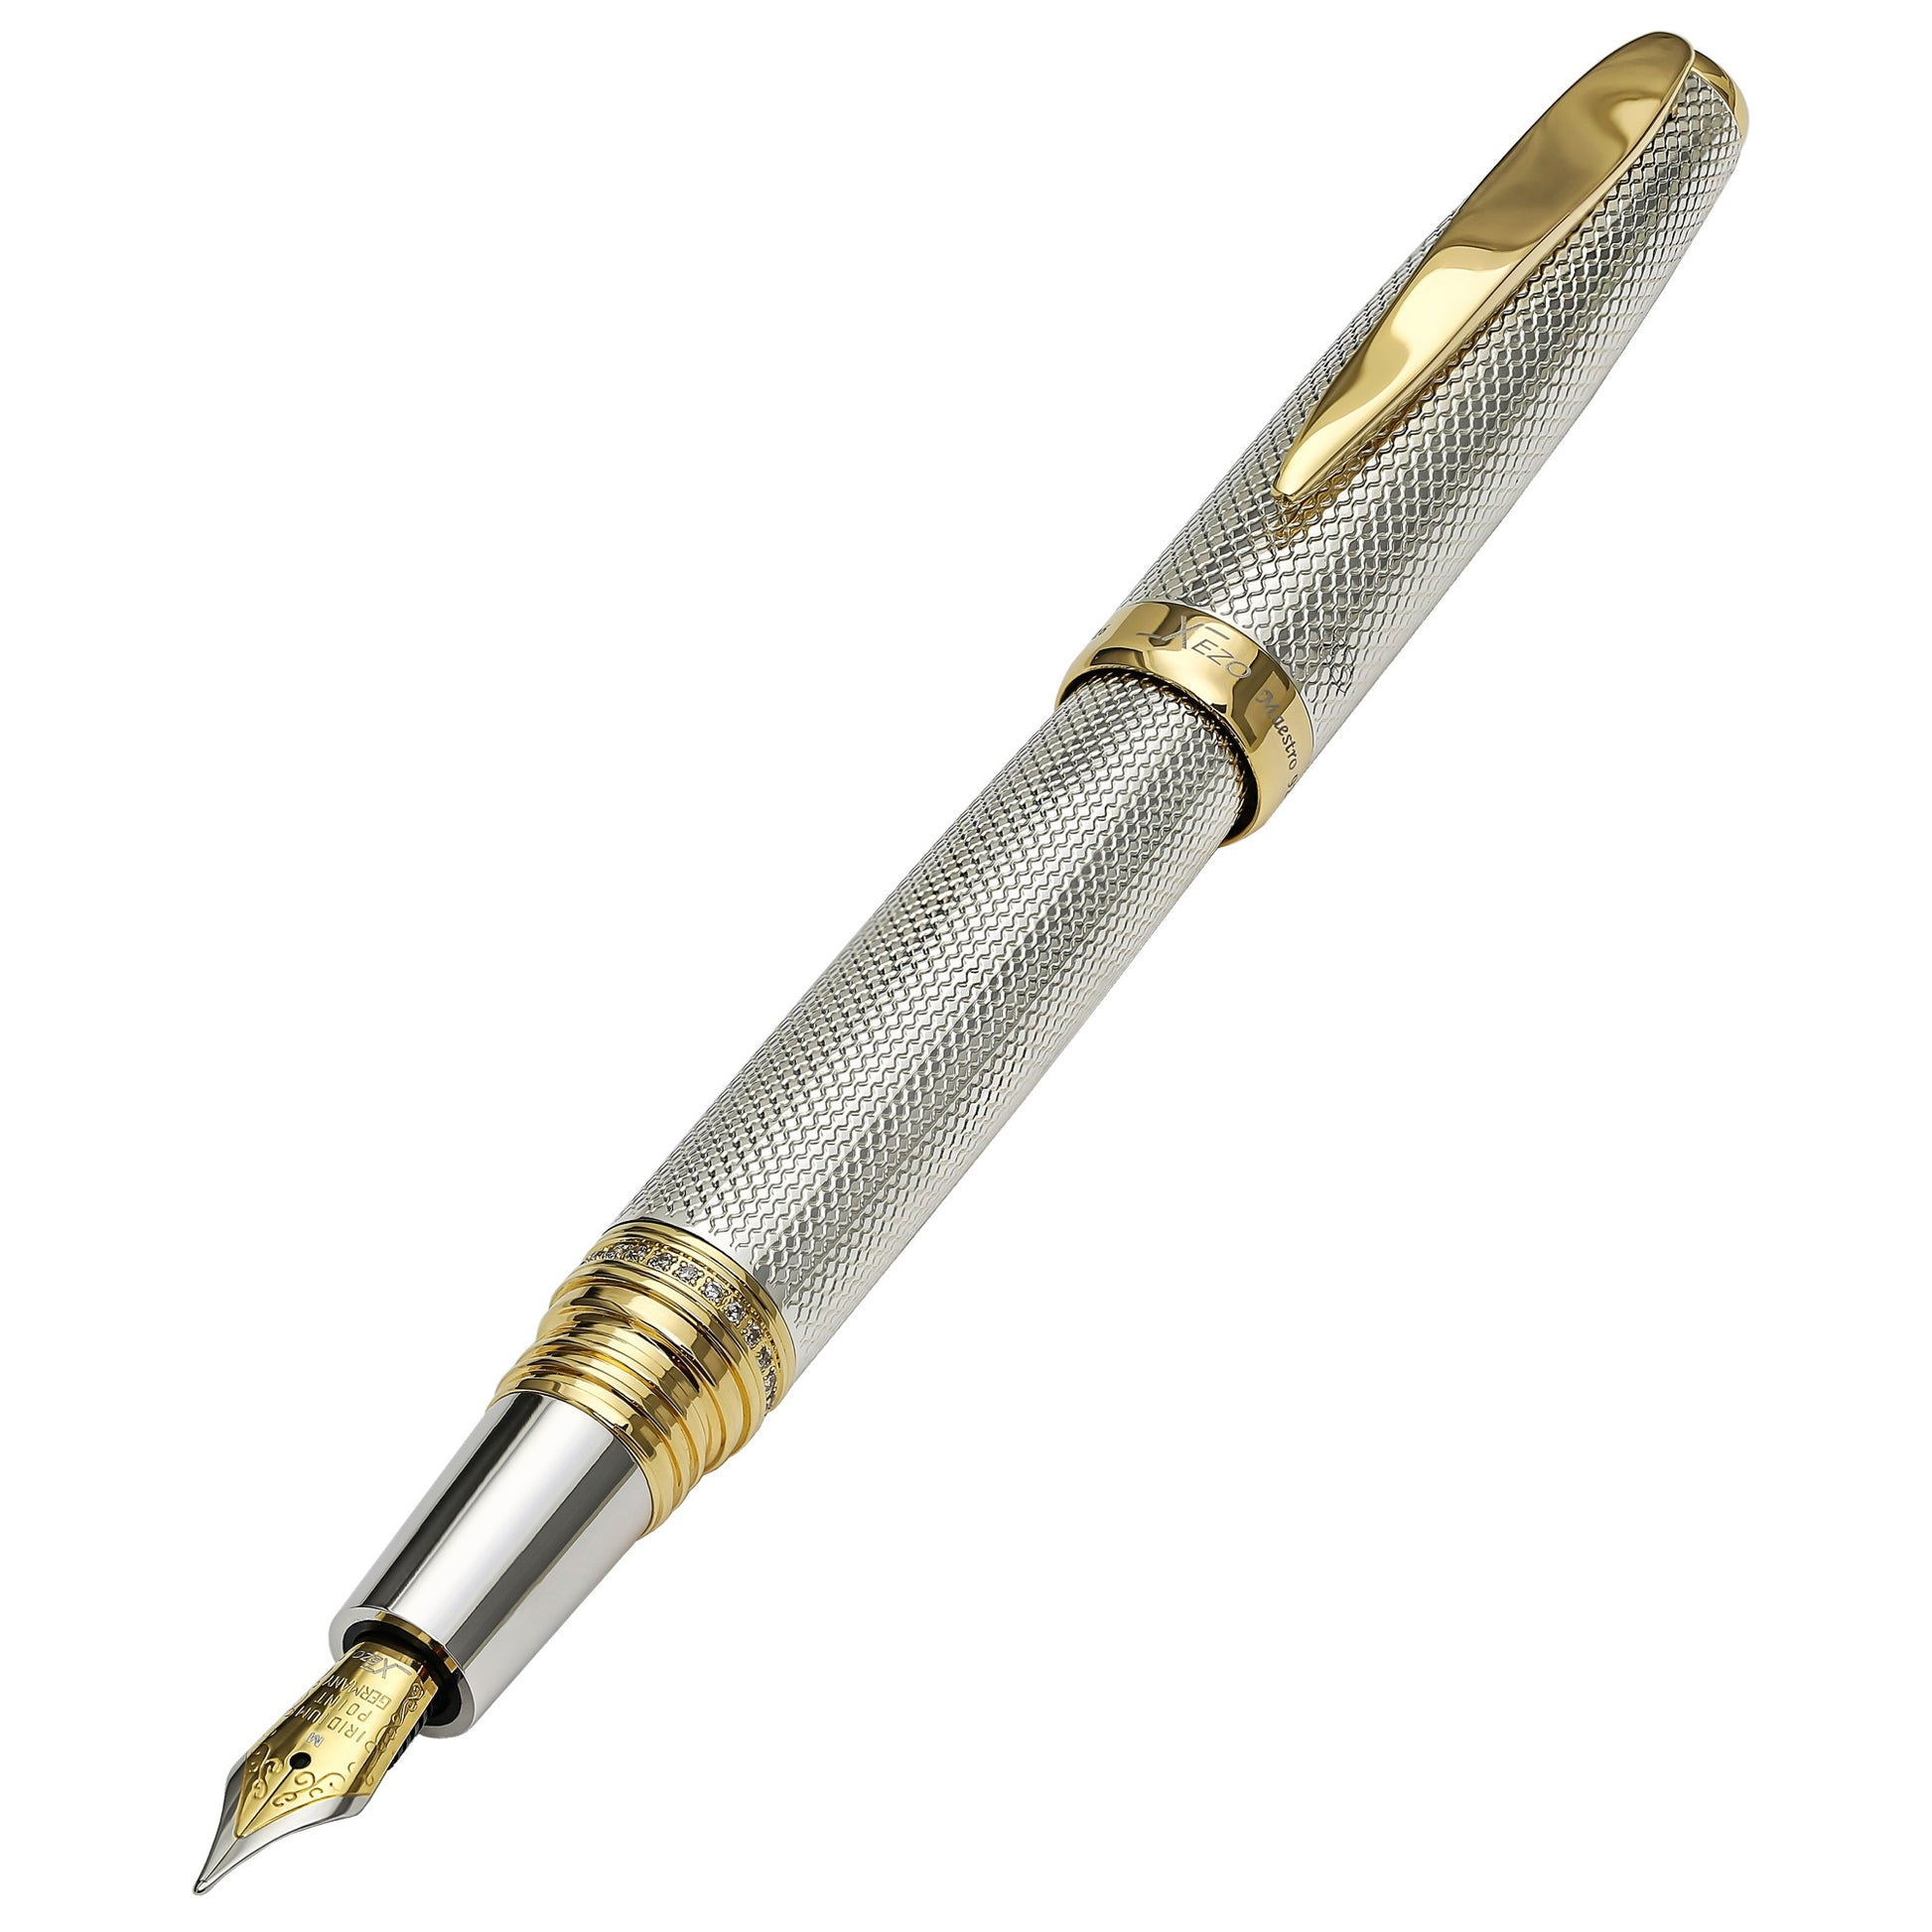 Xezo - Angled view of the front of the Maestro 925 Sterling Silver F-2 fountain pen